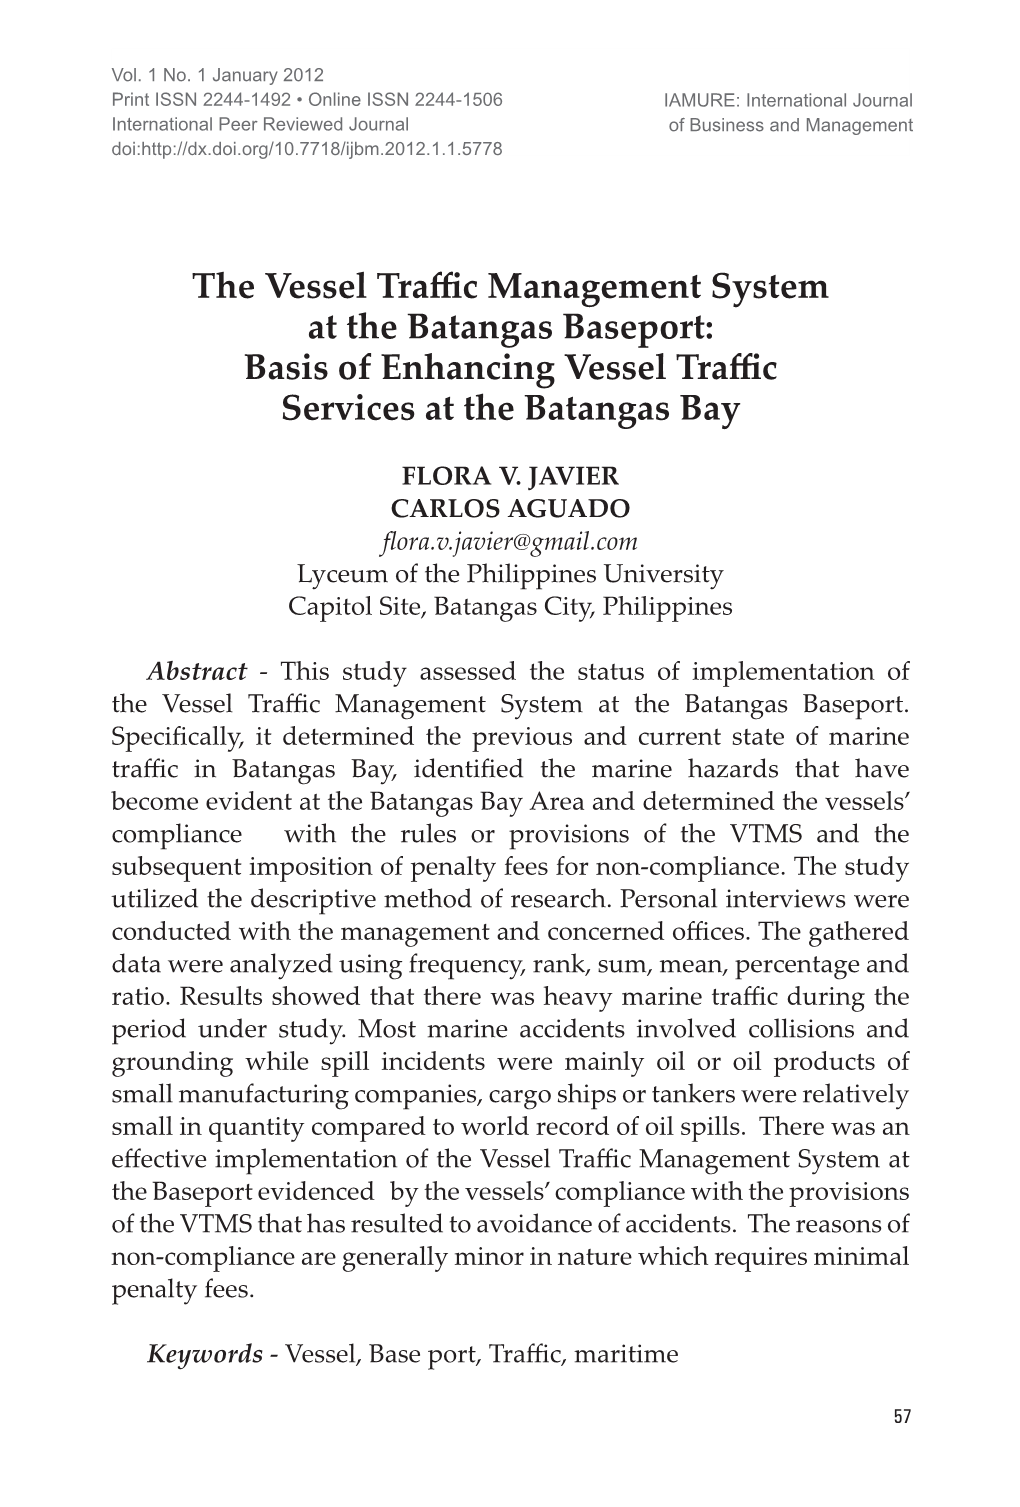 The Vessel Traffic Management System at the Batangas Baseport: Basis of Enhancing Vessel Traffic Services at the Batangas Bay